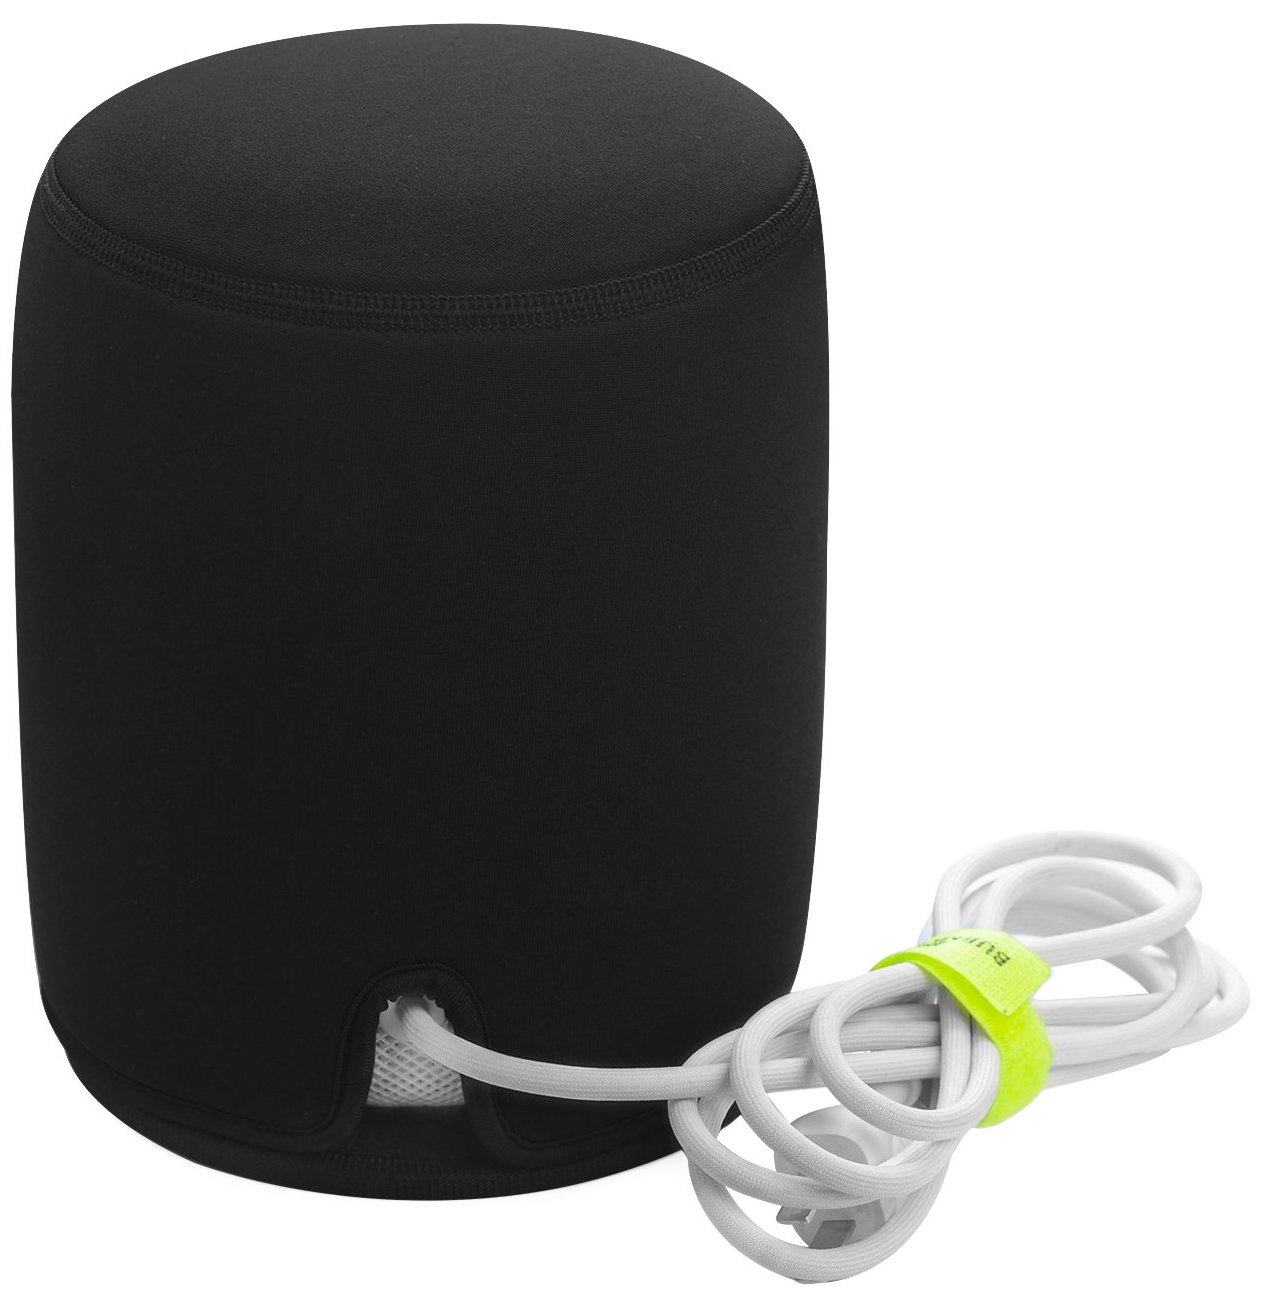 LukyNV Protectve Carrying Cover for HomePod